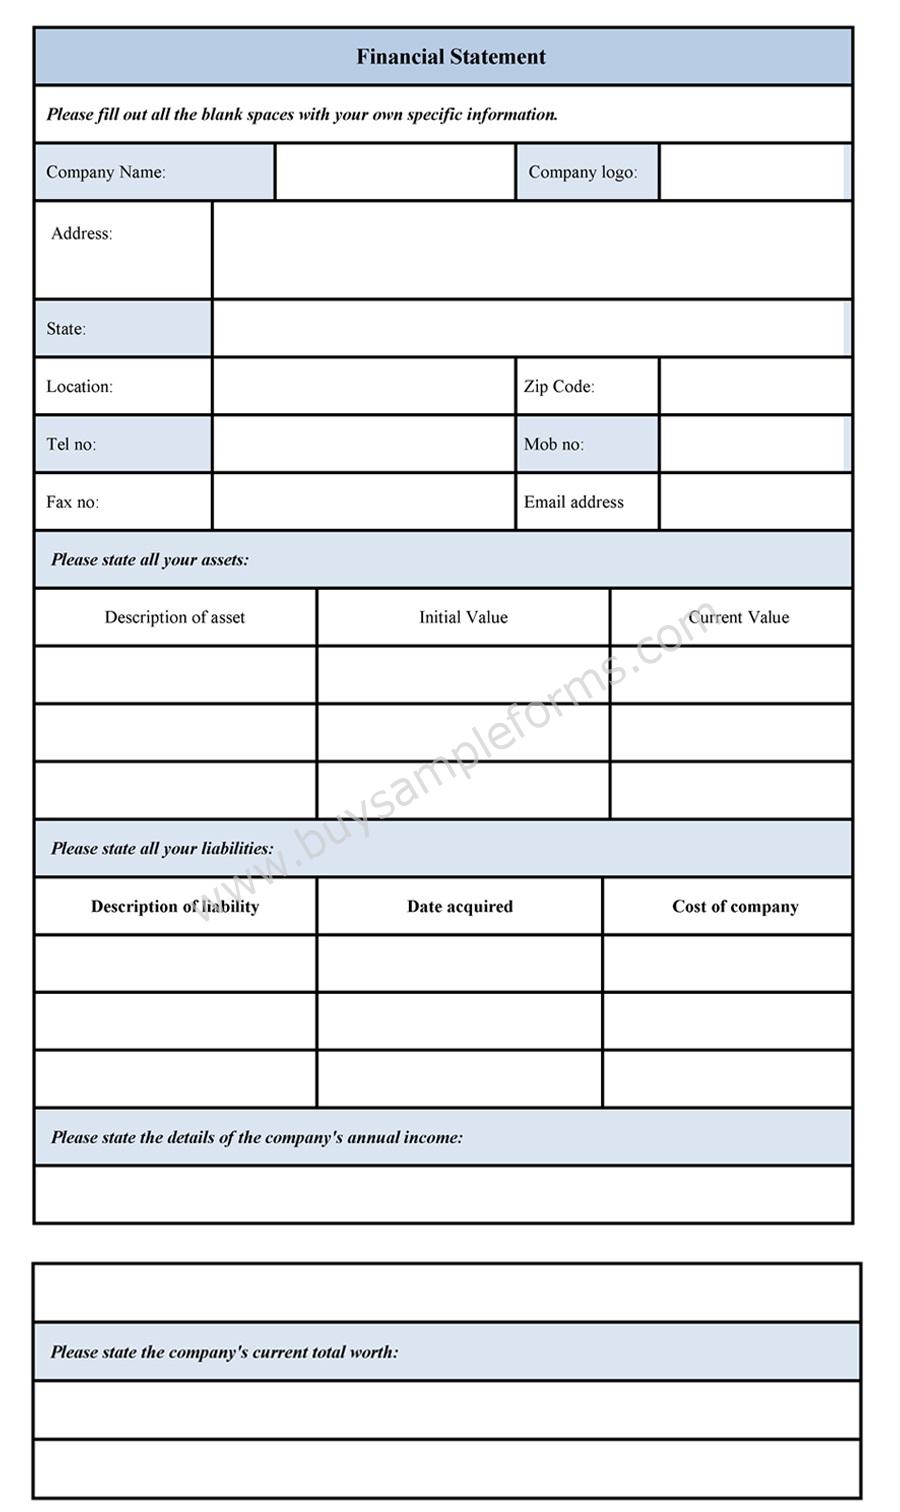 Online personal financial statement forms